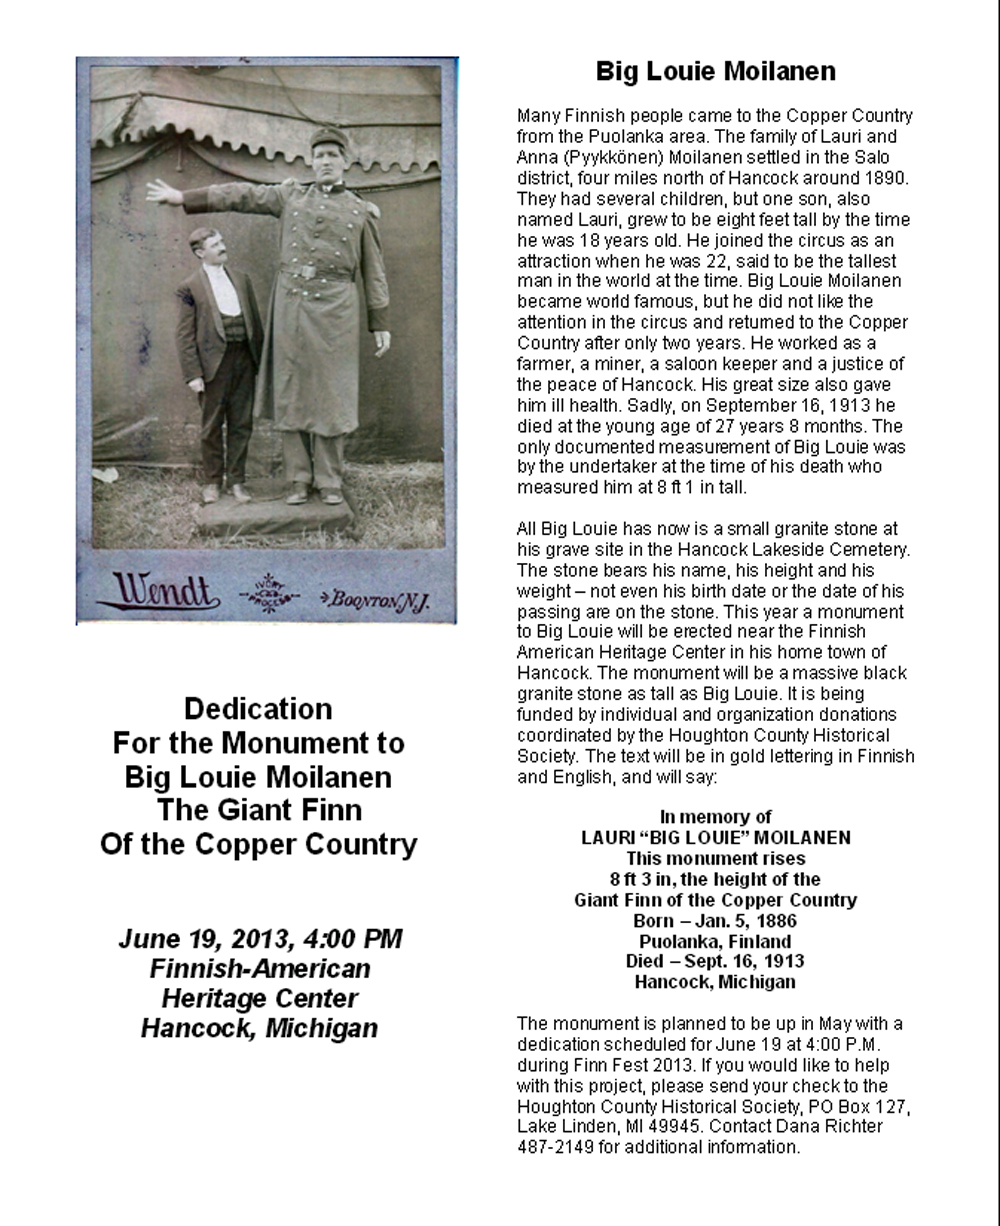 These first two images are of the publication announcing the effort to secure funding for the construction and placement of the monument.